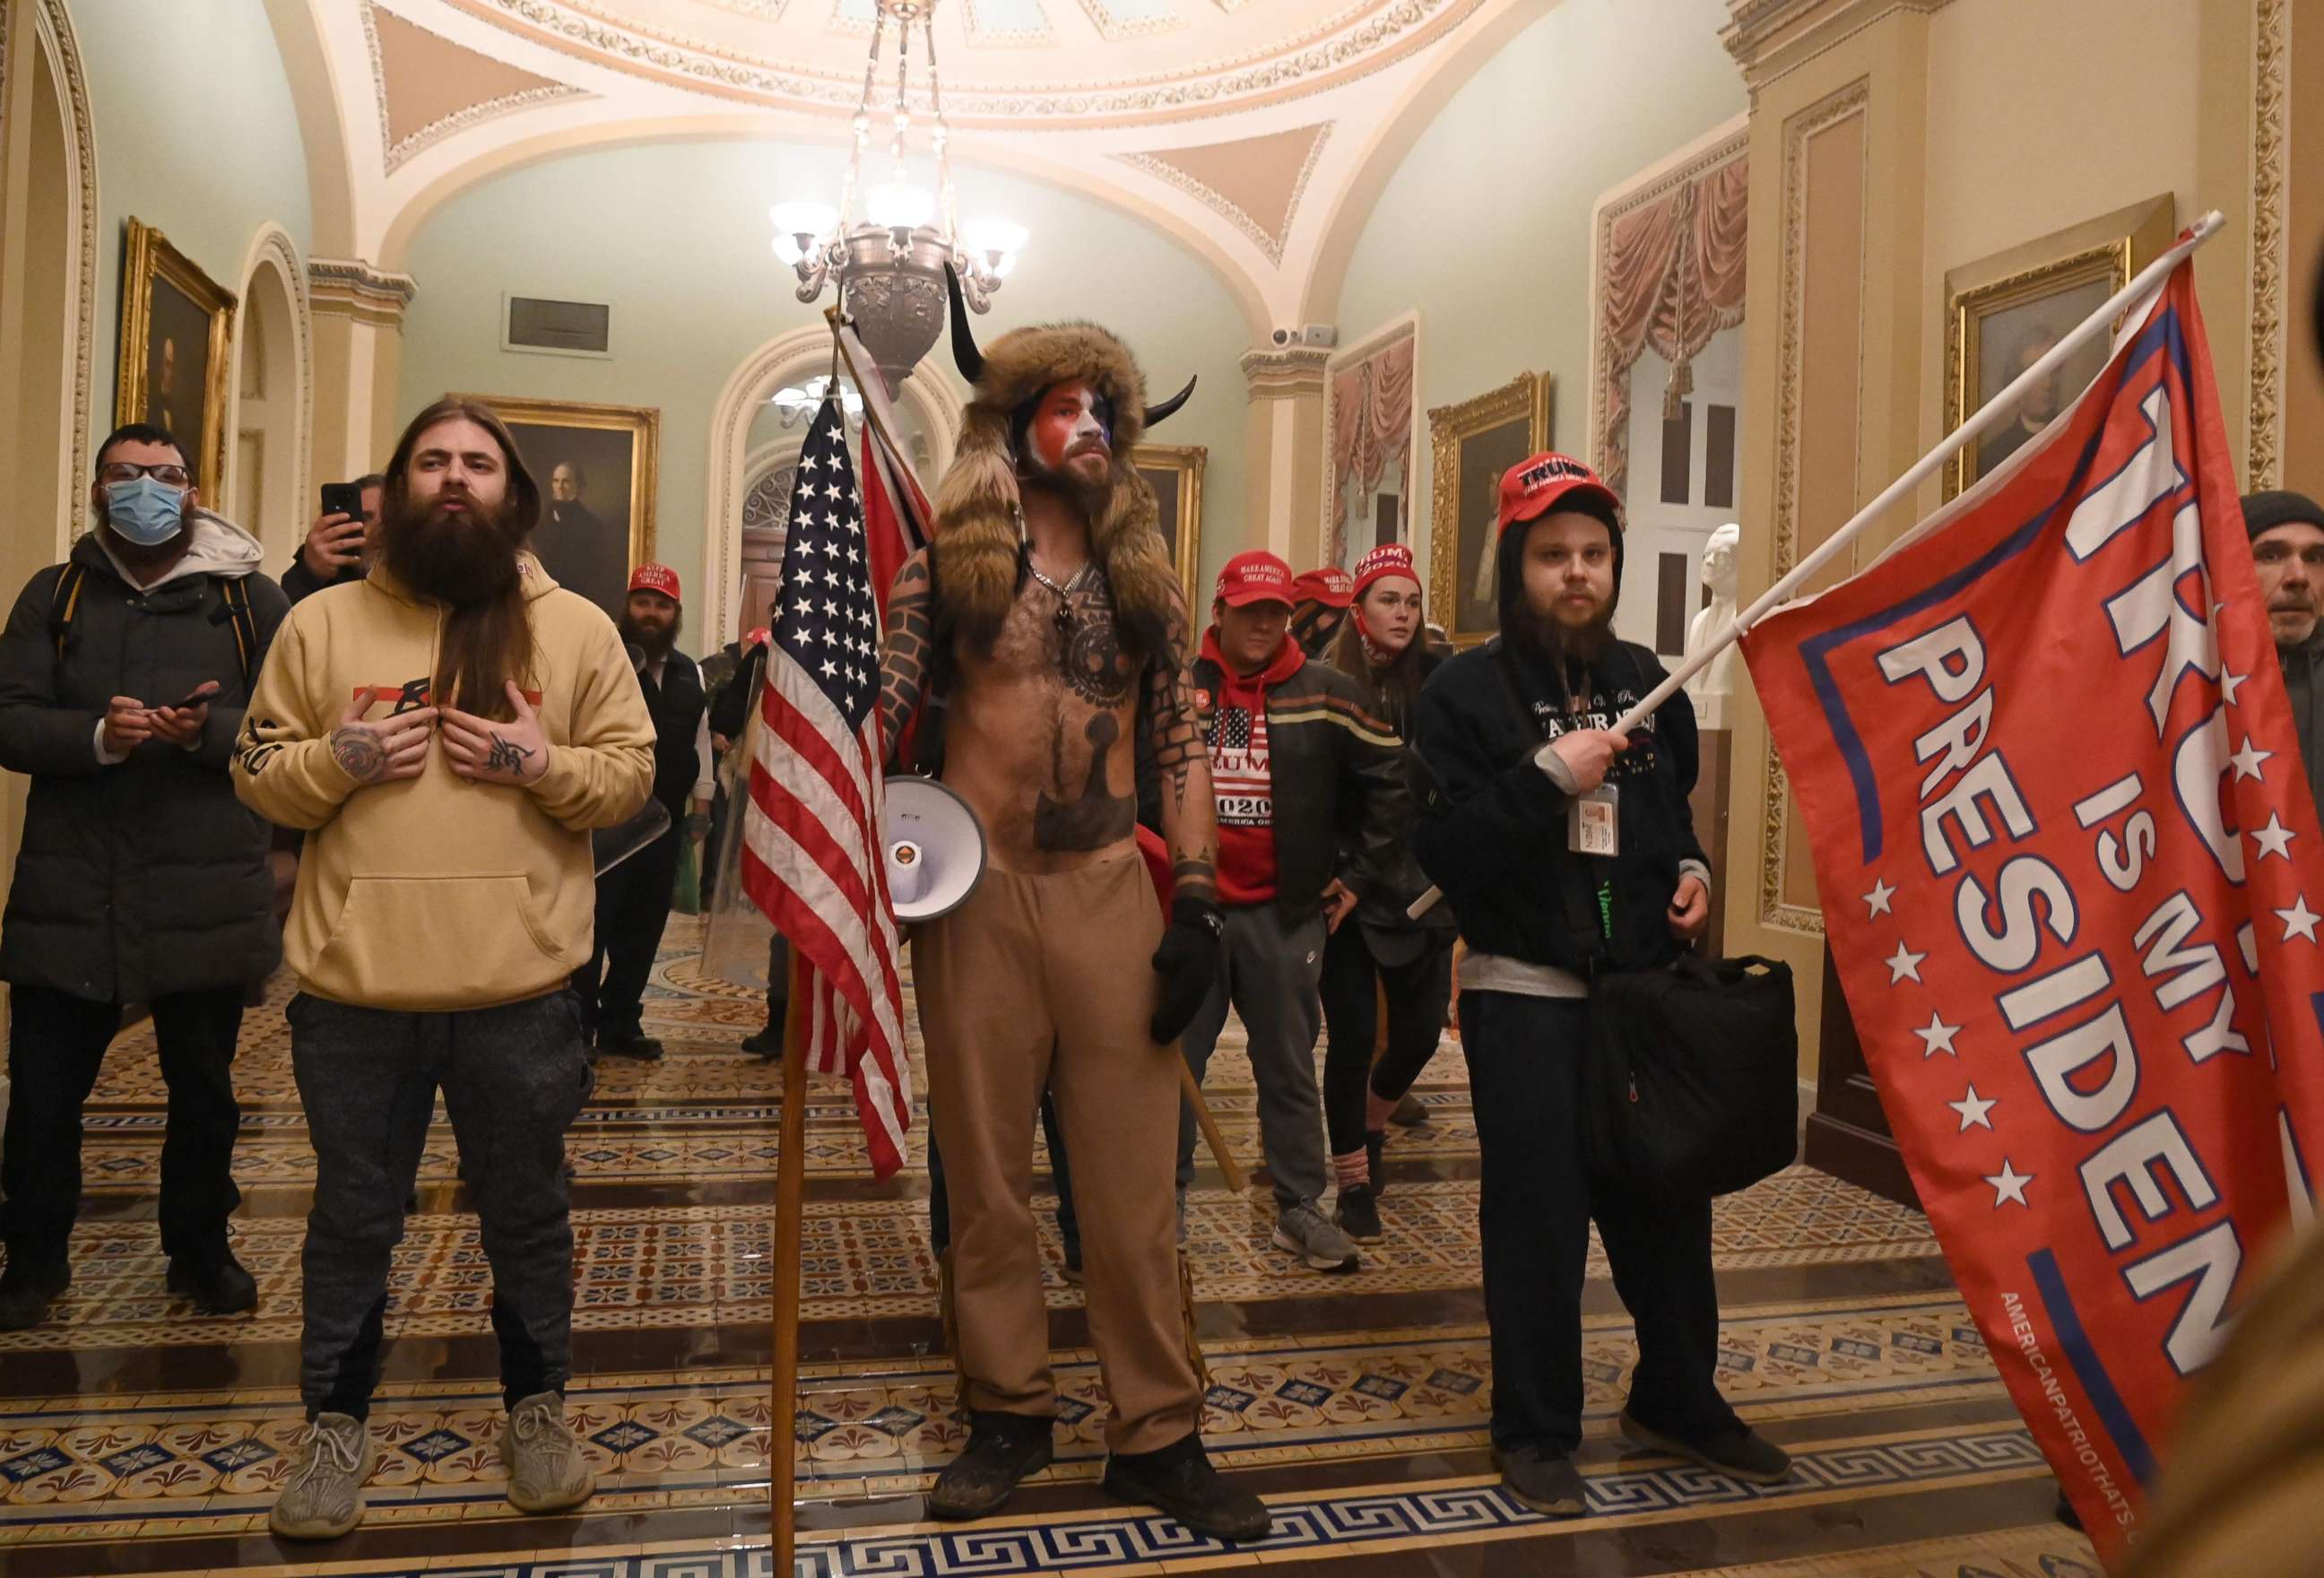 PHOTO: Supporters of US President Donald Trump enter the U.S. Capitol on Jan. 6, 2021, in Washington, D.C. Demonstrators breeched security and entered the Capitol as Congress debated the a 2020 presidential election Electoral Vote Certification.